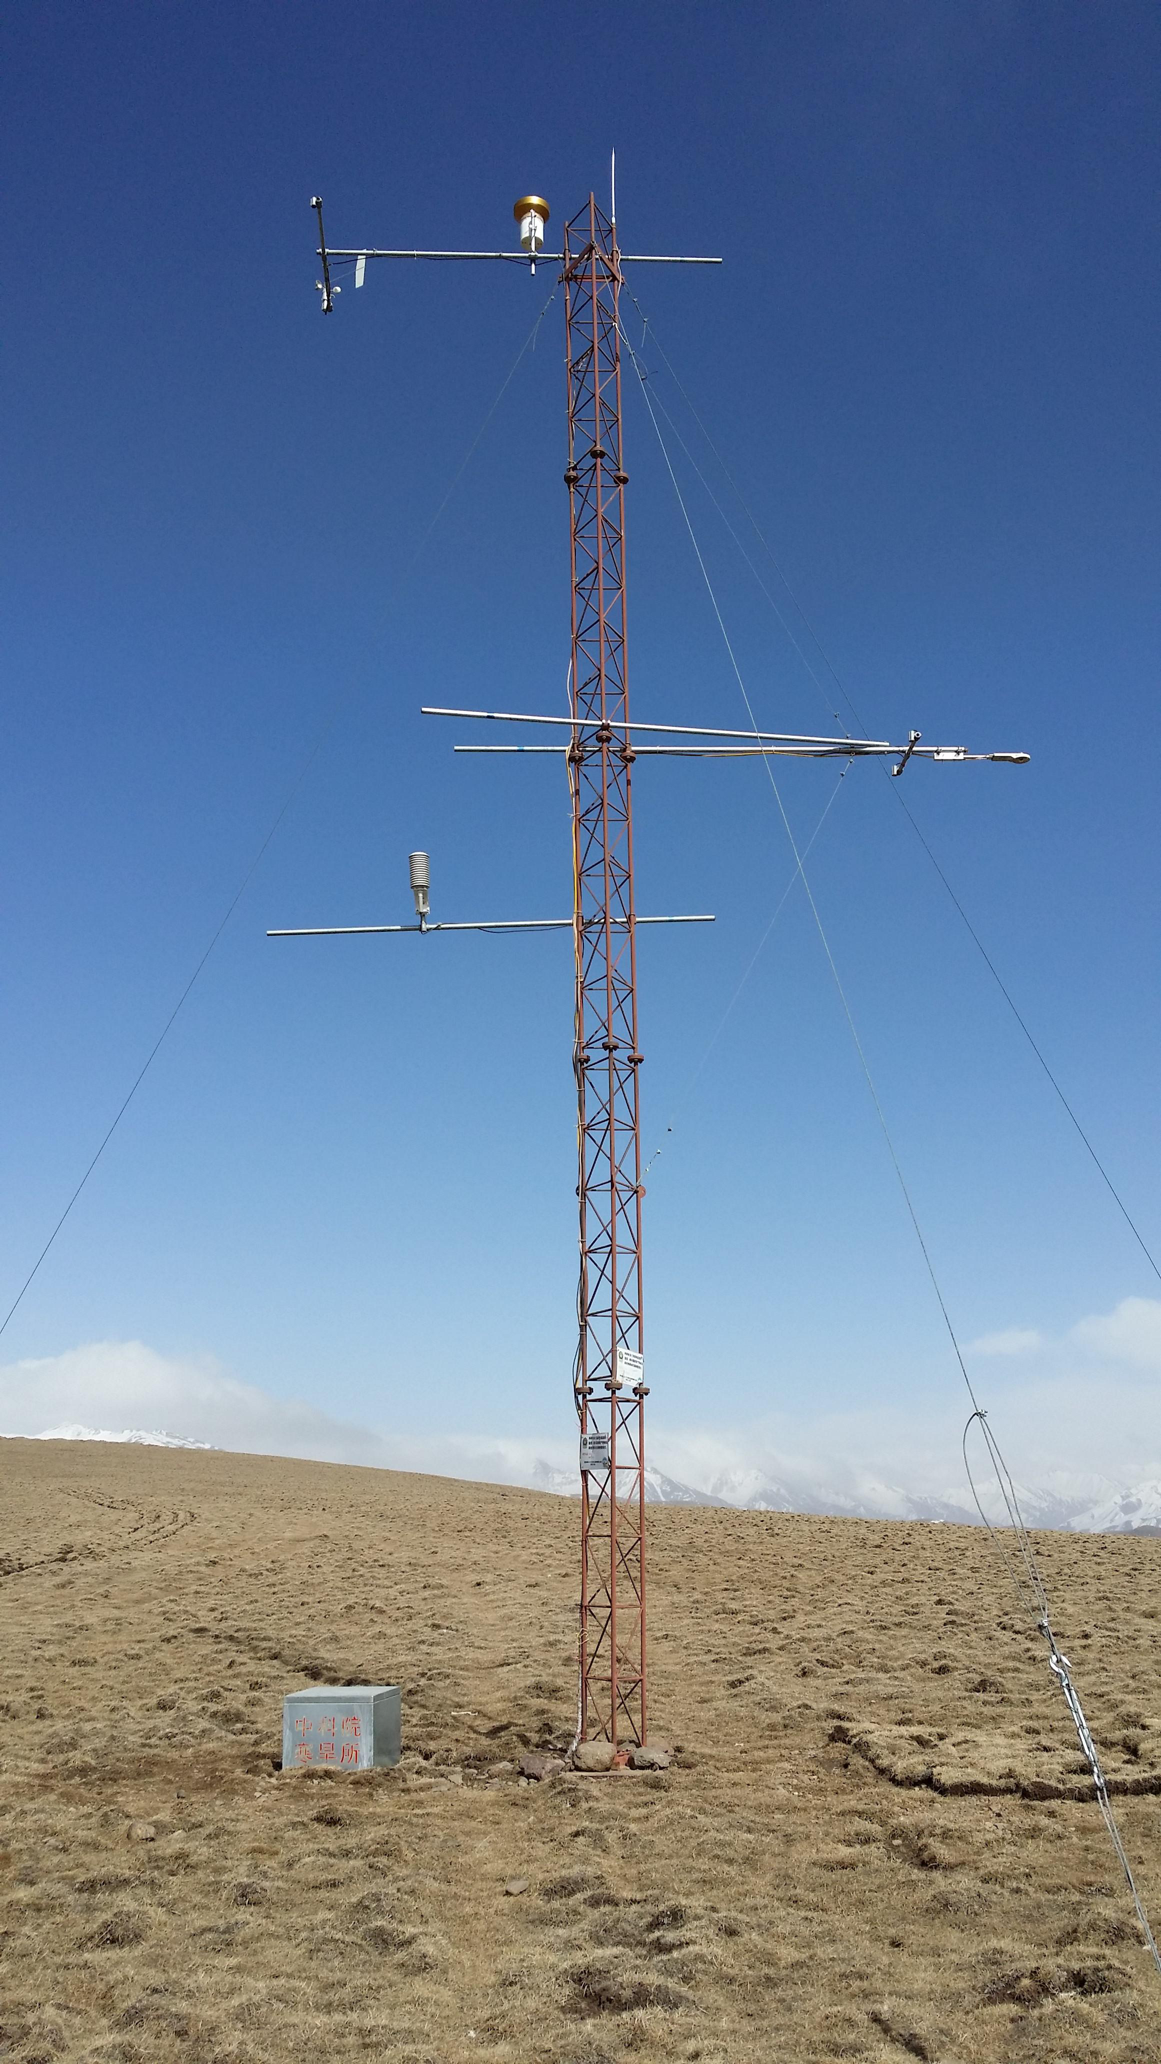 Qilian Mountains integrated observatory network: Dataset of Heihe integrated observatory network (automatic weather station of Jingyangling station, 2021)